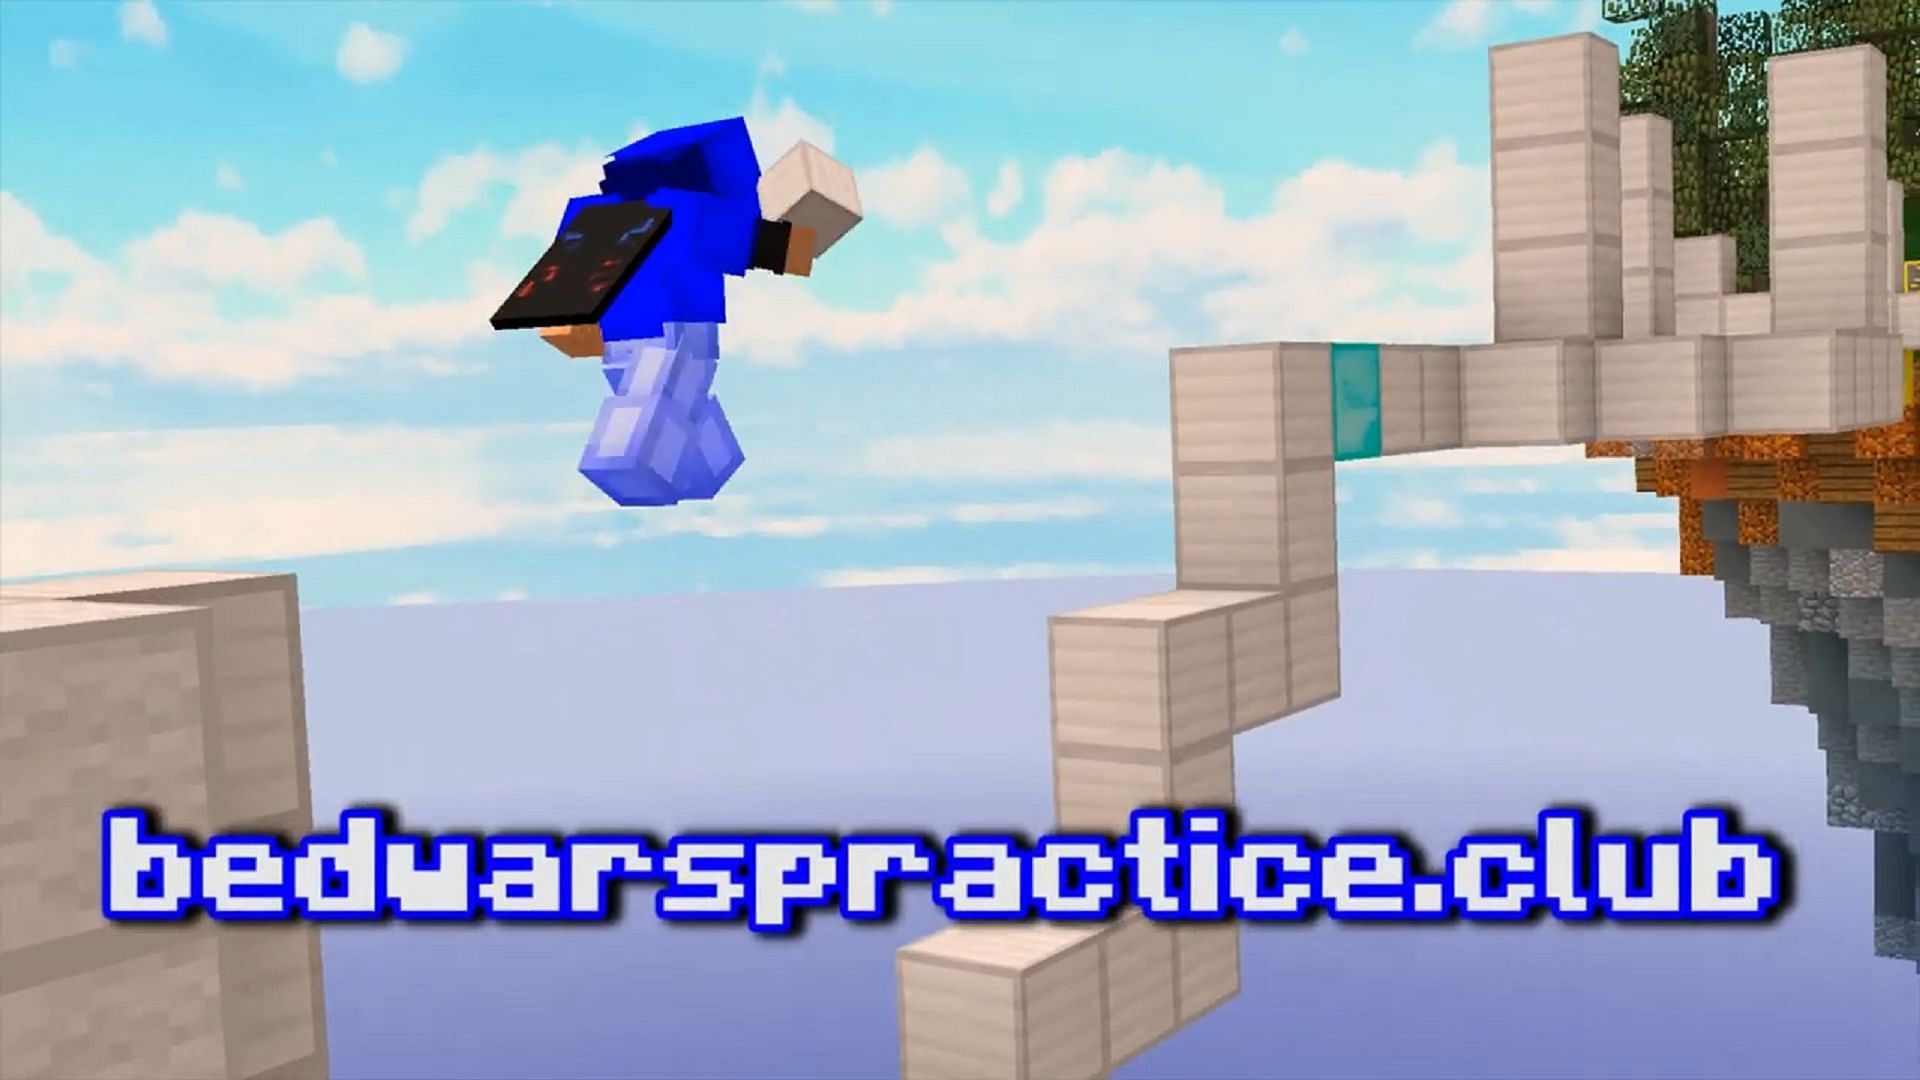 BedWars Practice Club is perfect for fans who want to kick back and train (Image via KaZPro/YouTube)